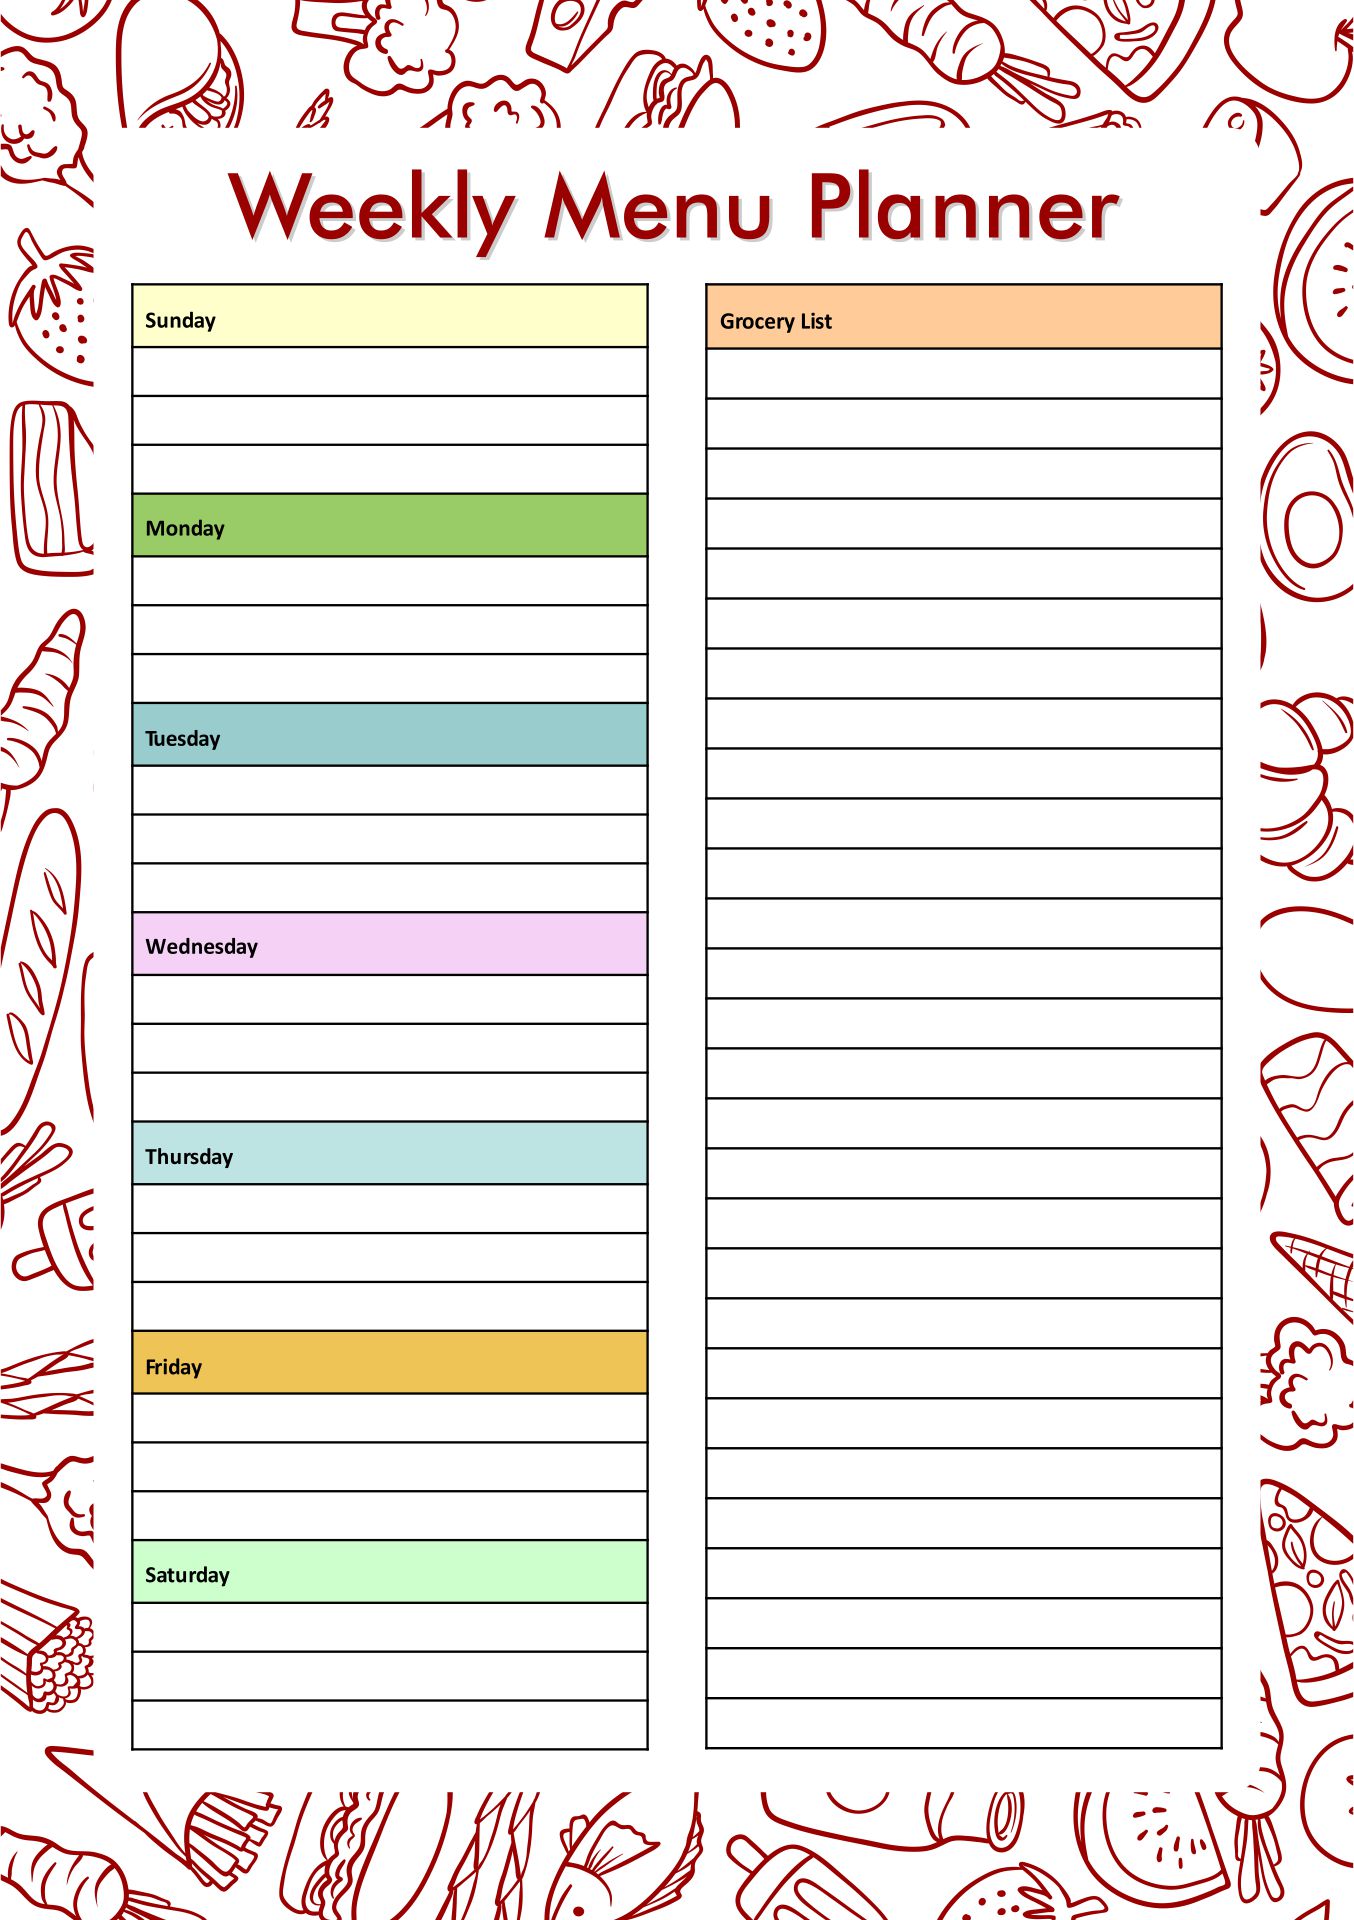 Free Printable Meal Planner Calorie Charts